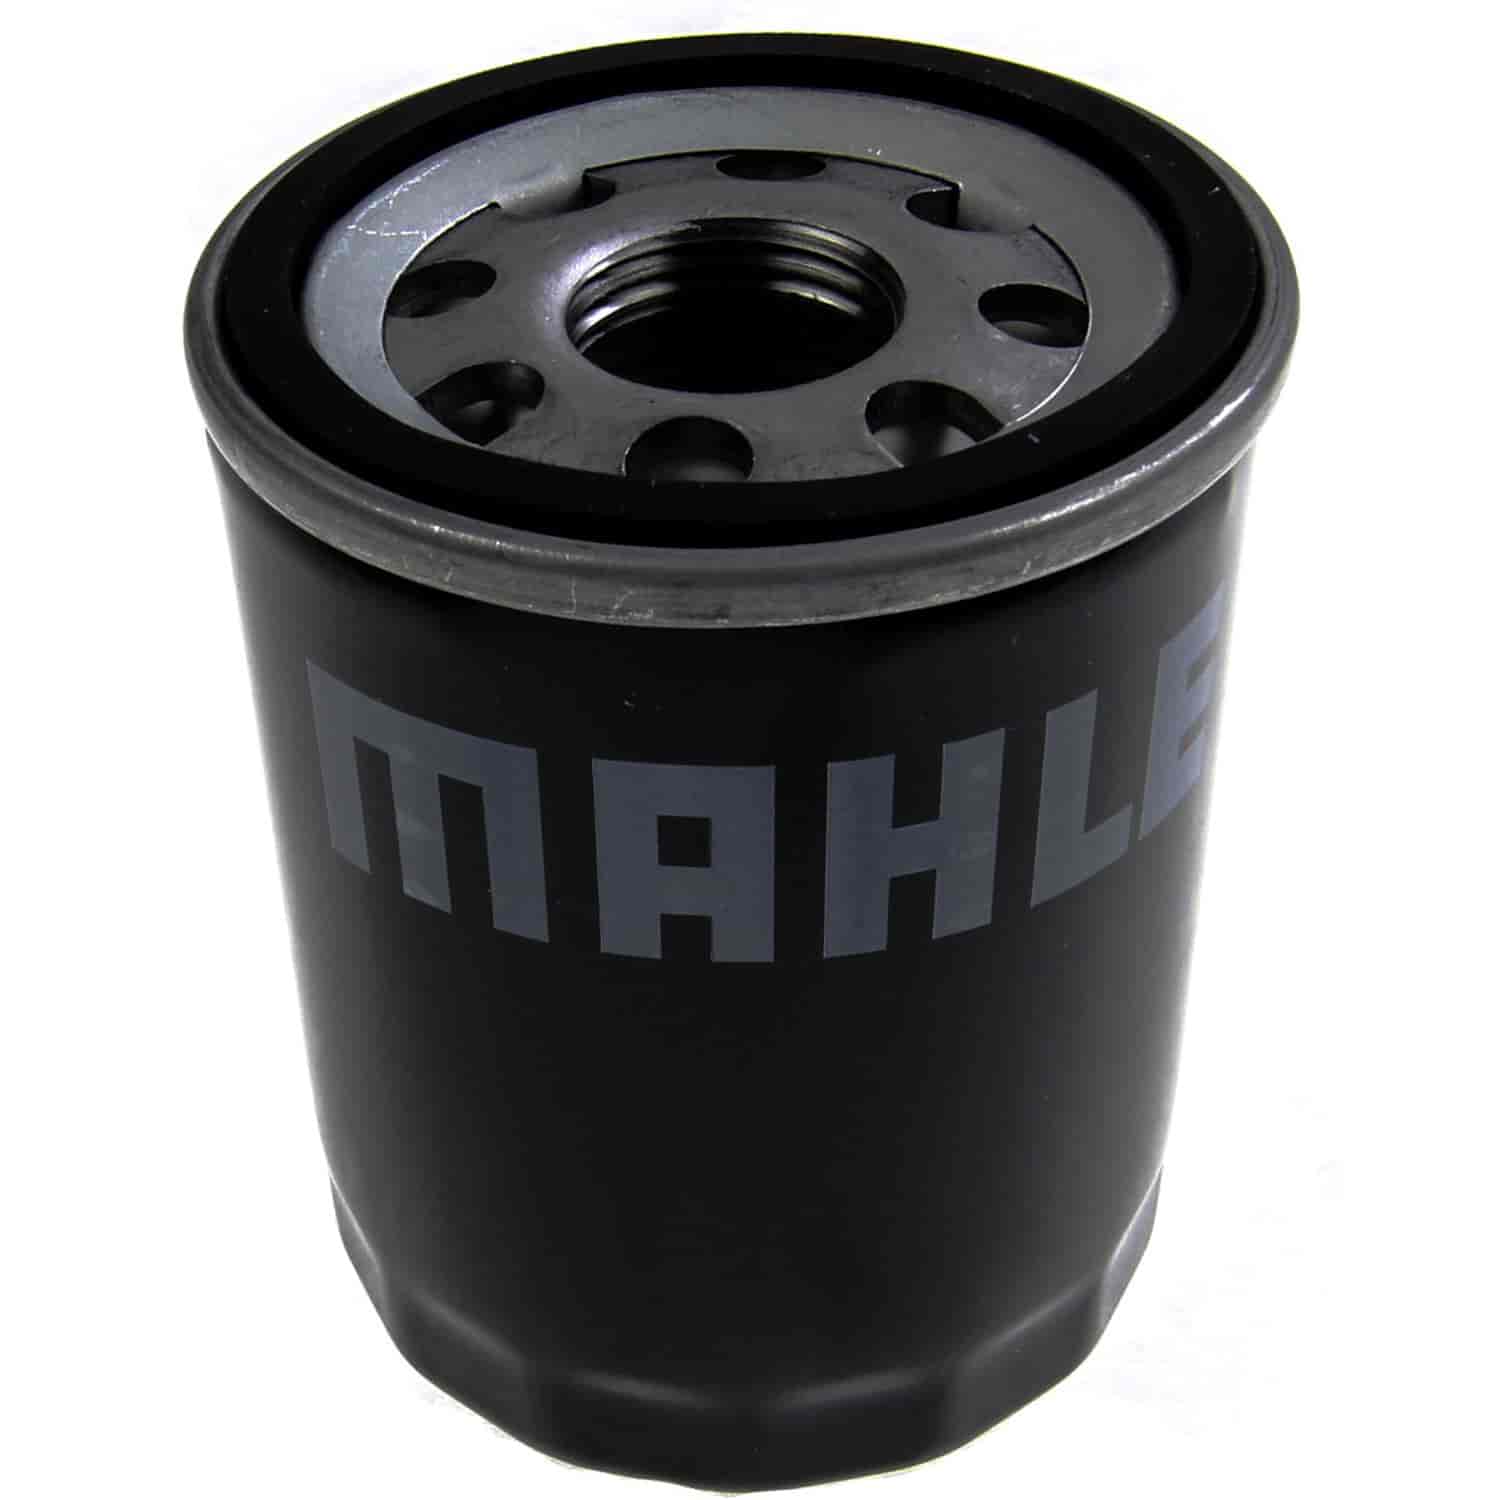 Mahle Oil Filter Ford Thunderbird 03-05 Lincoln LS